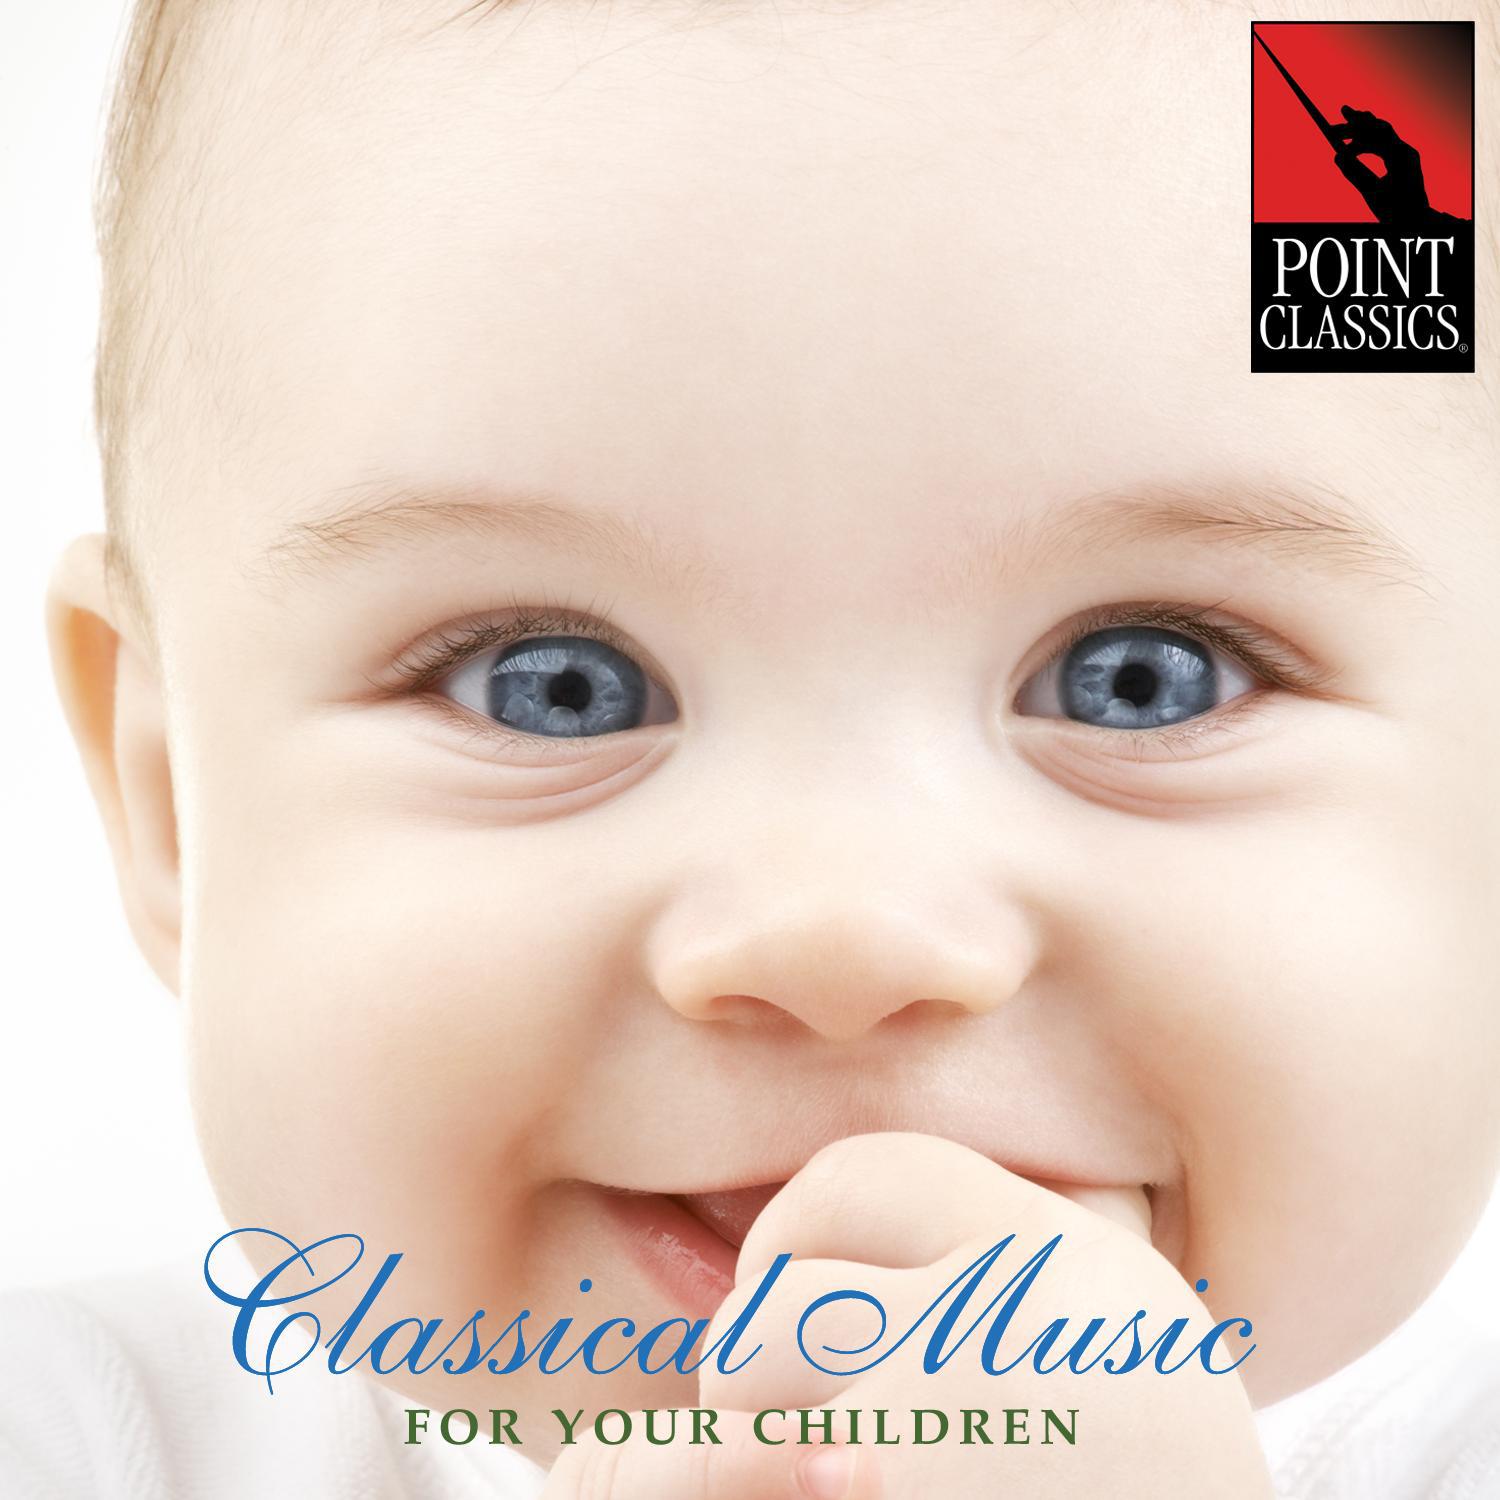 Classical Music for Your Children